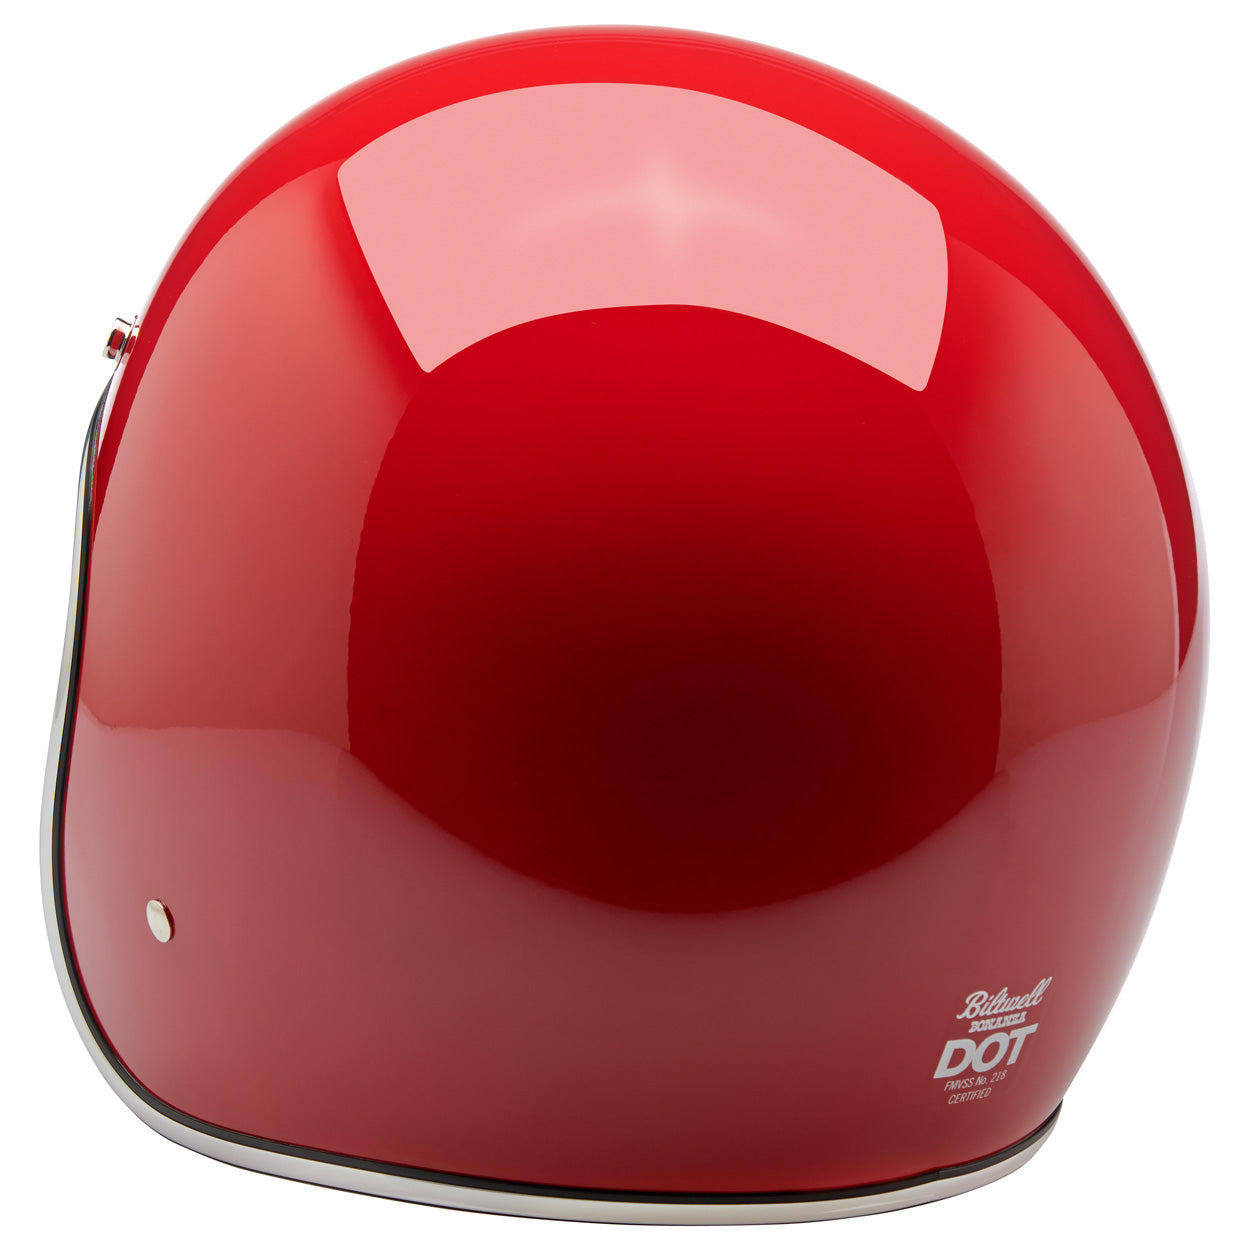 CLOSEOUT Bonanza Helmet - Gloss Blood Red SIZE - XX-LARGE ONLY